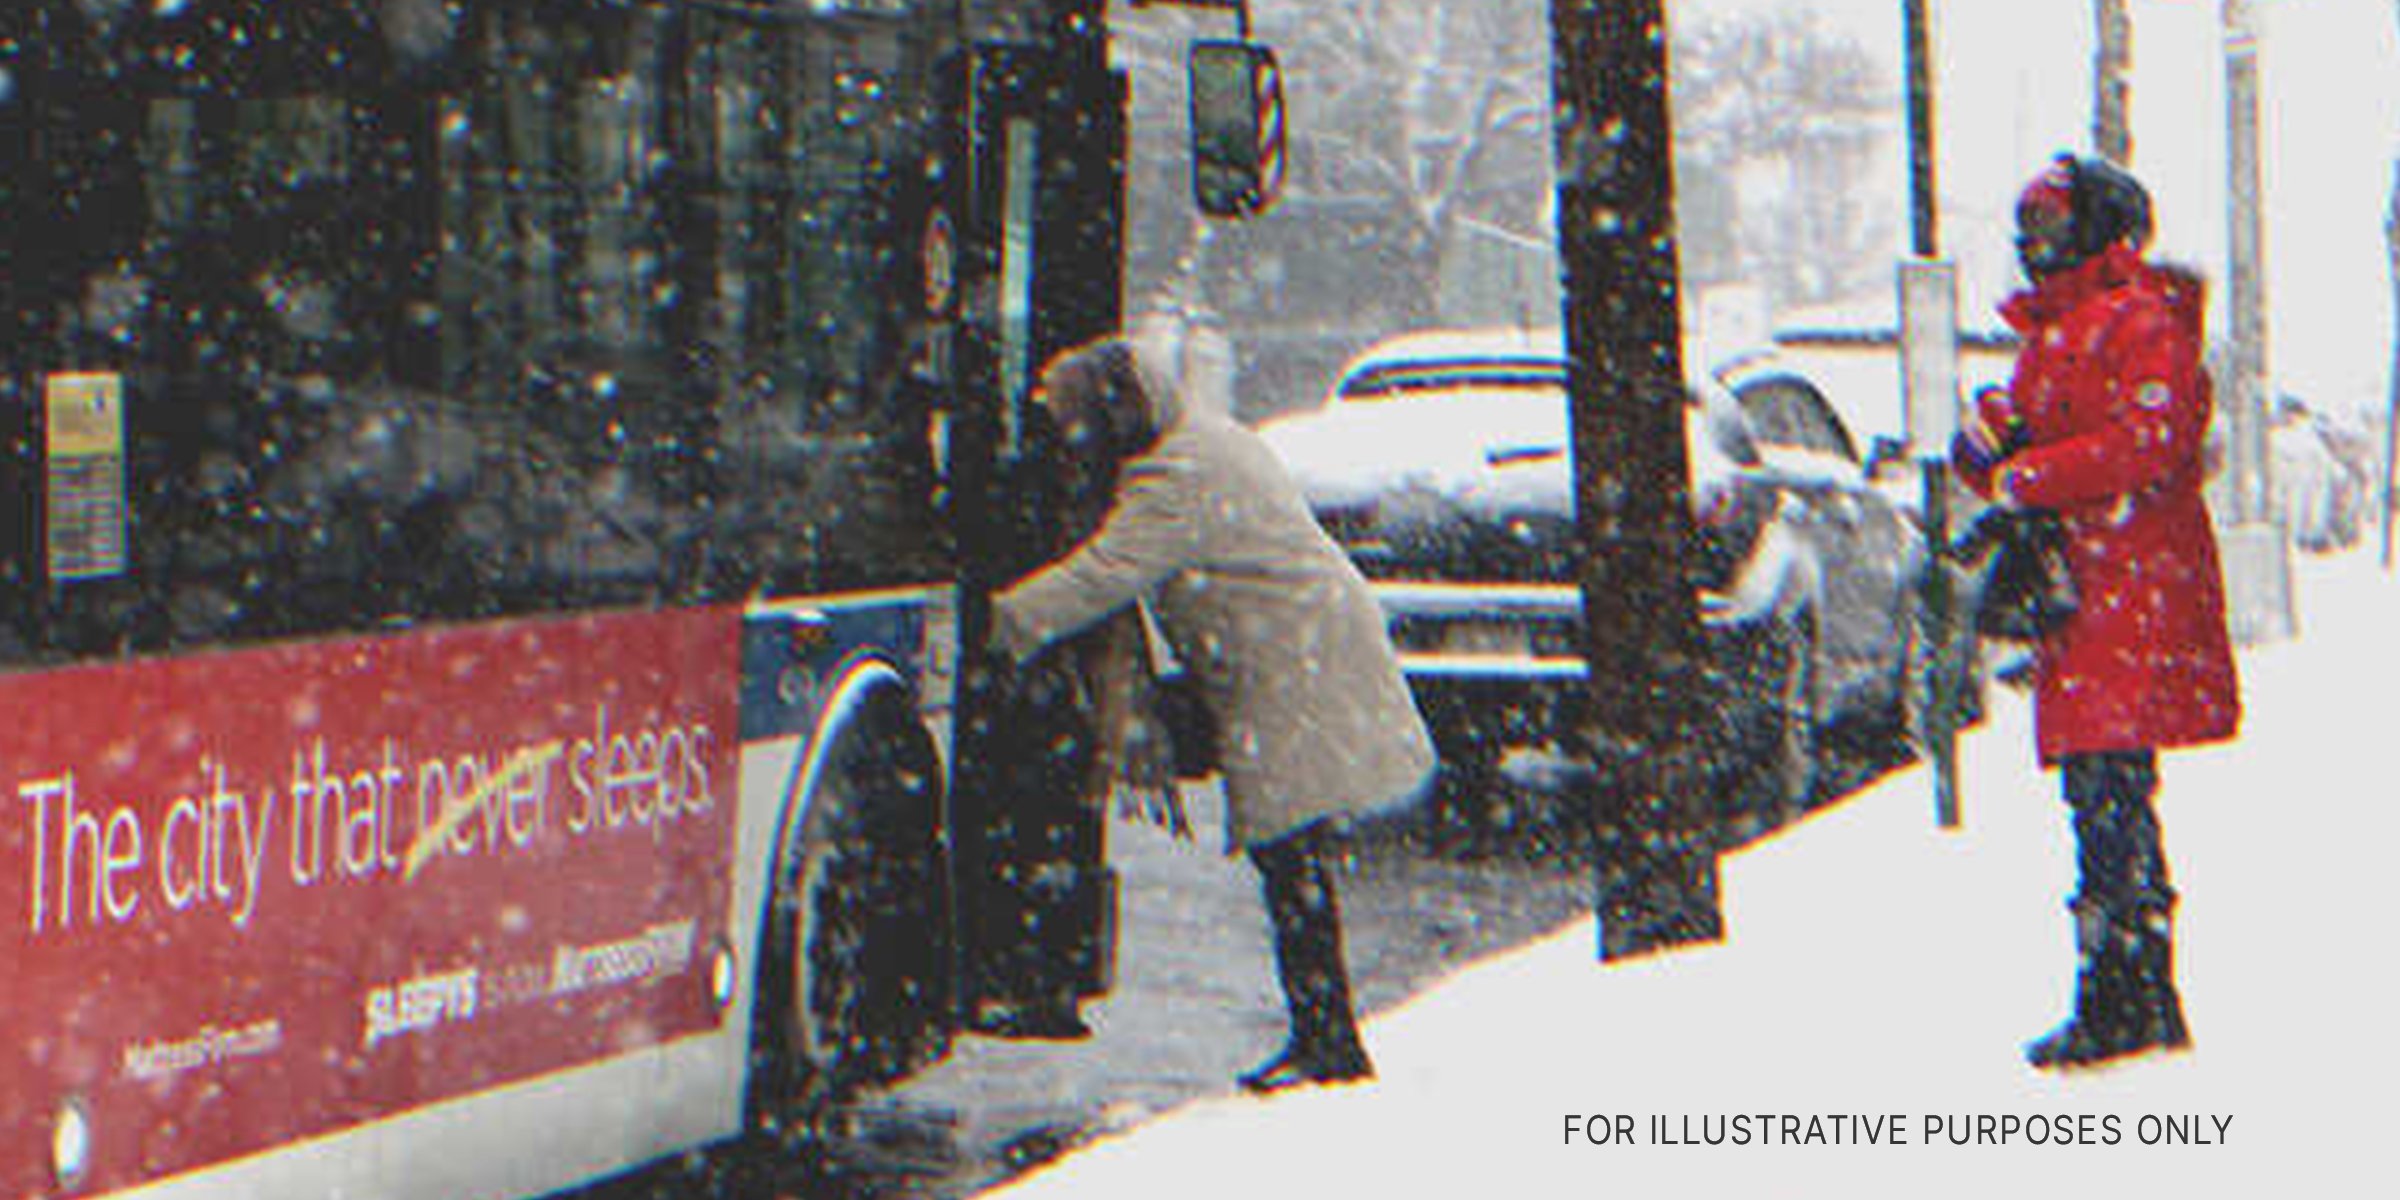 Two people stand in the snow beside a bus | Source: Shutterstock